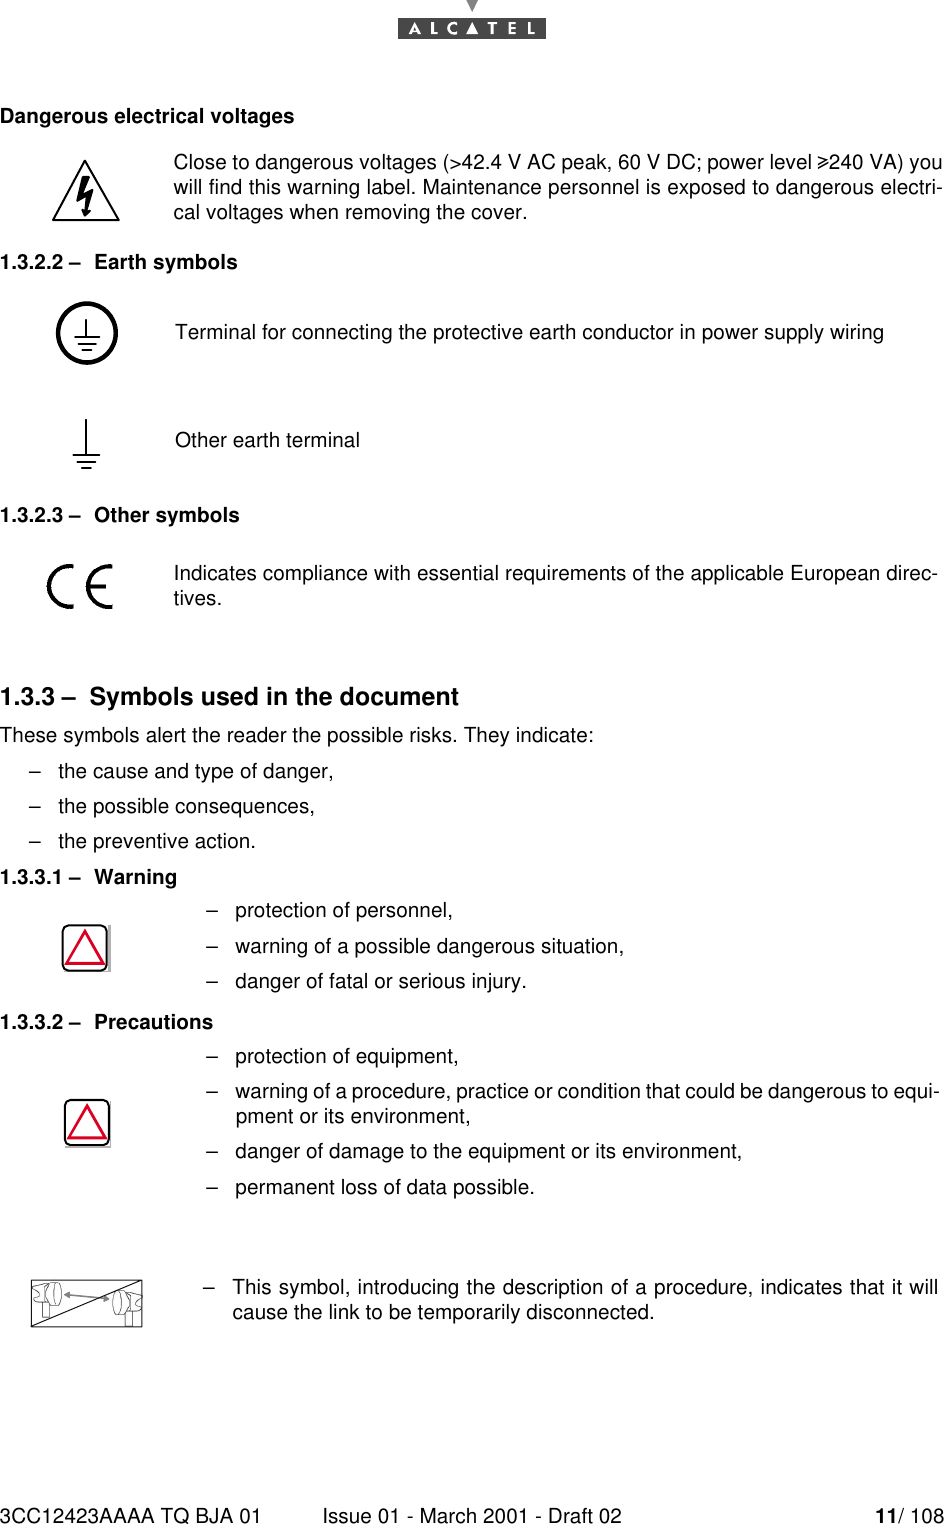 3CC12423AAAA TQ BJA 01 Issue 01 - March 2001 - Draft 02 11/ 10814Dangerous electrical voltages1.3.2.2 –Earth symbols1.3.2.3 –Other symbols1.3.3 –Symbols used in the documentThese symbols alert the reader the possible risks. They indicate:–the cause and type of danger,–the possible consequences,–the preventive action.1.3.3.1 –Warning1.3.3.2 –PrecautionsClose to dangerous voltages (&gt;42.4 V AC peak, 60 V DC; power level 4240 VA) youwill find this warning label. Maintenance personnel is exposed to dangerous electri-cal voltages when removing the cover.Terminal for connecting the protective earth conductor in power supply wiringOther earth terminalIndicates compliance with essential requirements of the applicable European direc-tives.–protection of personnel,–warning of a possible dangerous situation,–danger of fatal or serious injury.–protection of equipment,–warning of a procedure, practice or condition that could be dangerous to equi-pment or its environment,–danger of damage to the equipment or its environment,–permanent loss of data possible.–This symbol, introducing the description of a procedure, indicates that it willcause the link to be temporarily disconnected.